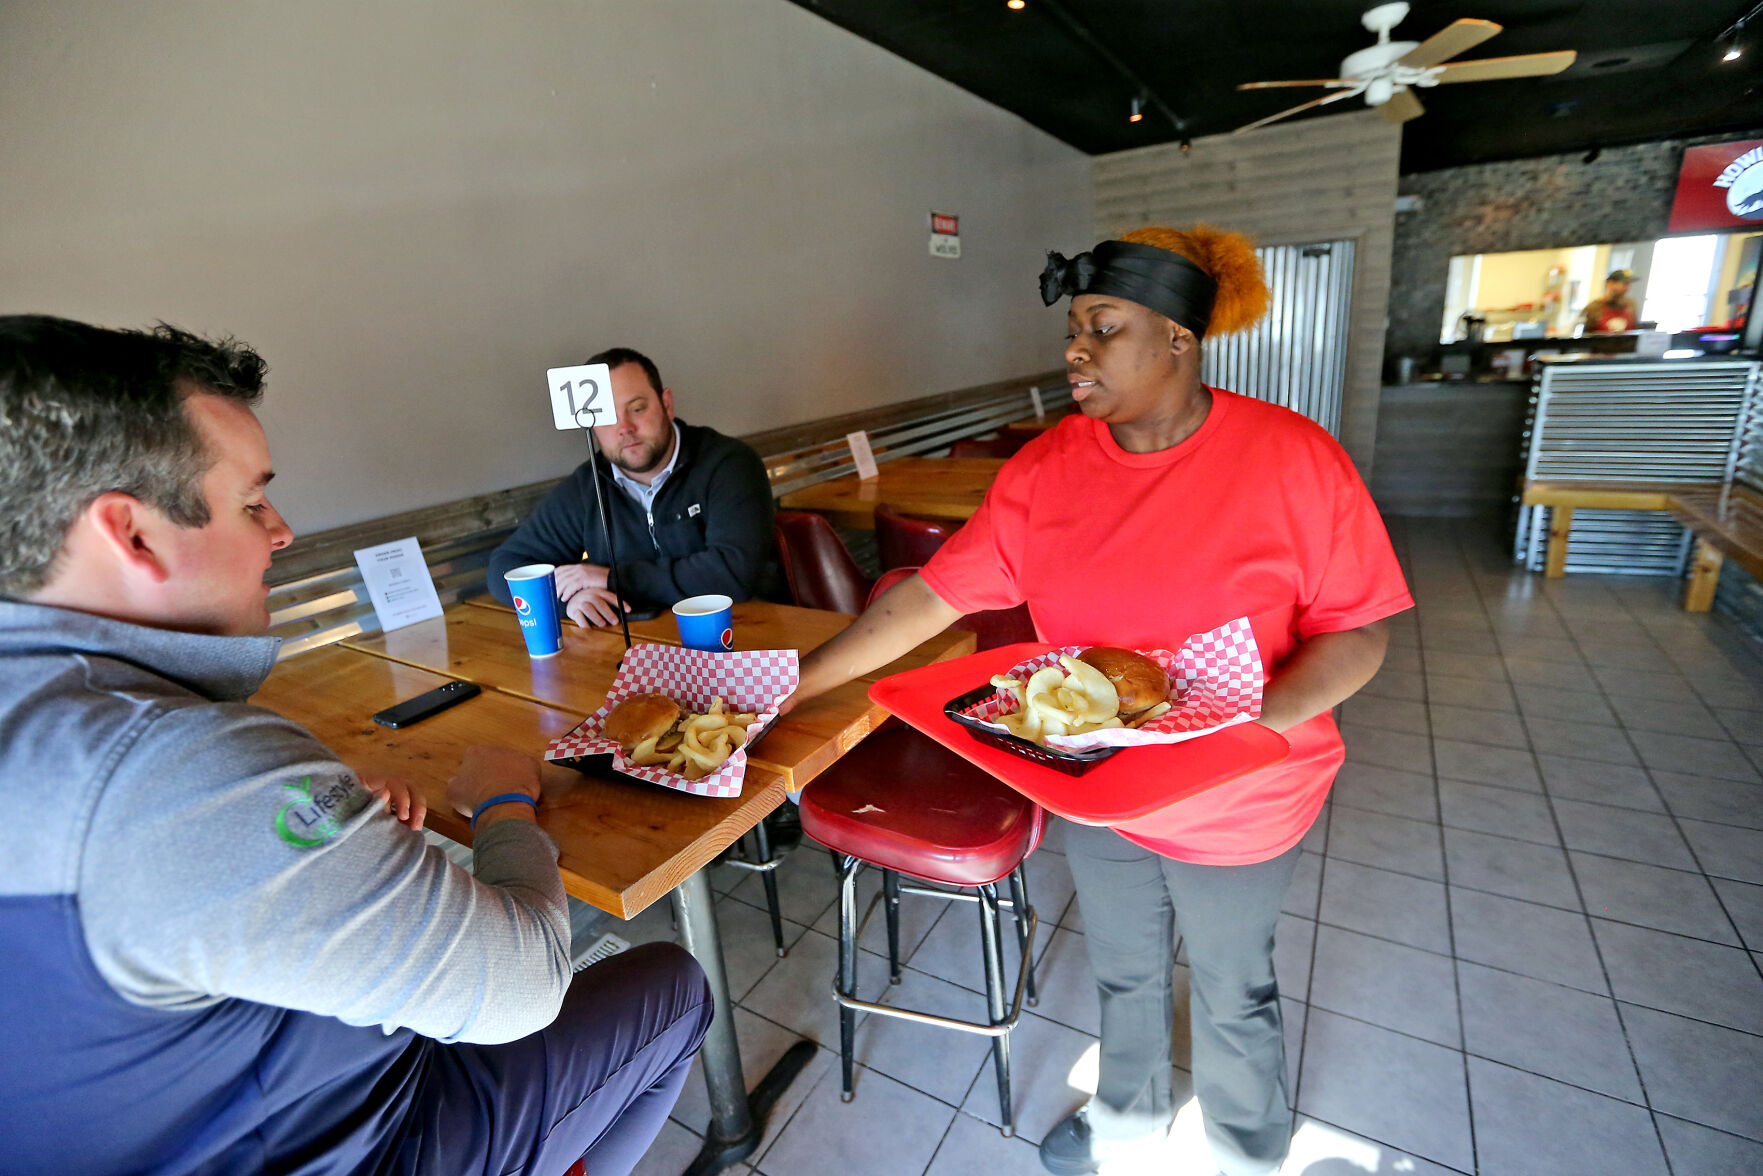 Dawneacia Arnold brings an order to Austin Vogt (far left) and Alex Gaul, both of Dubuque, at Howling BBQ in Dubuque on Wednesday, Nov. 9, 2022.    PHOTO CREDIT: JESSICA REILLY